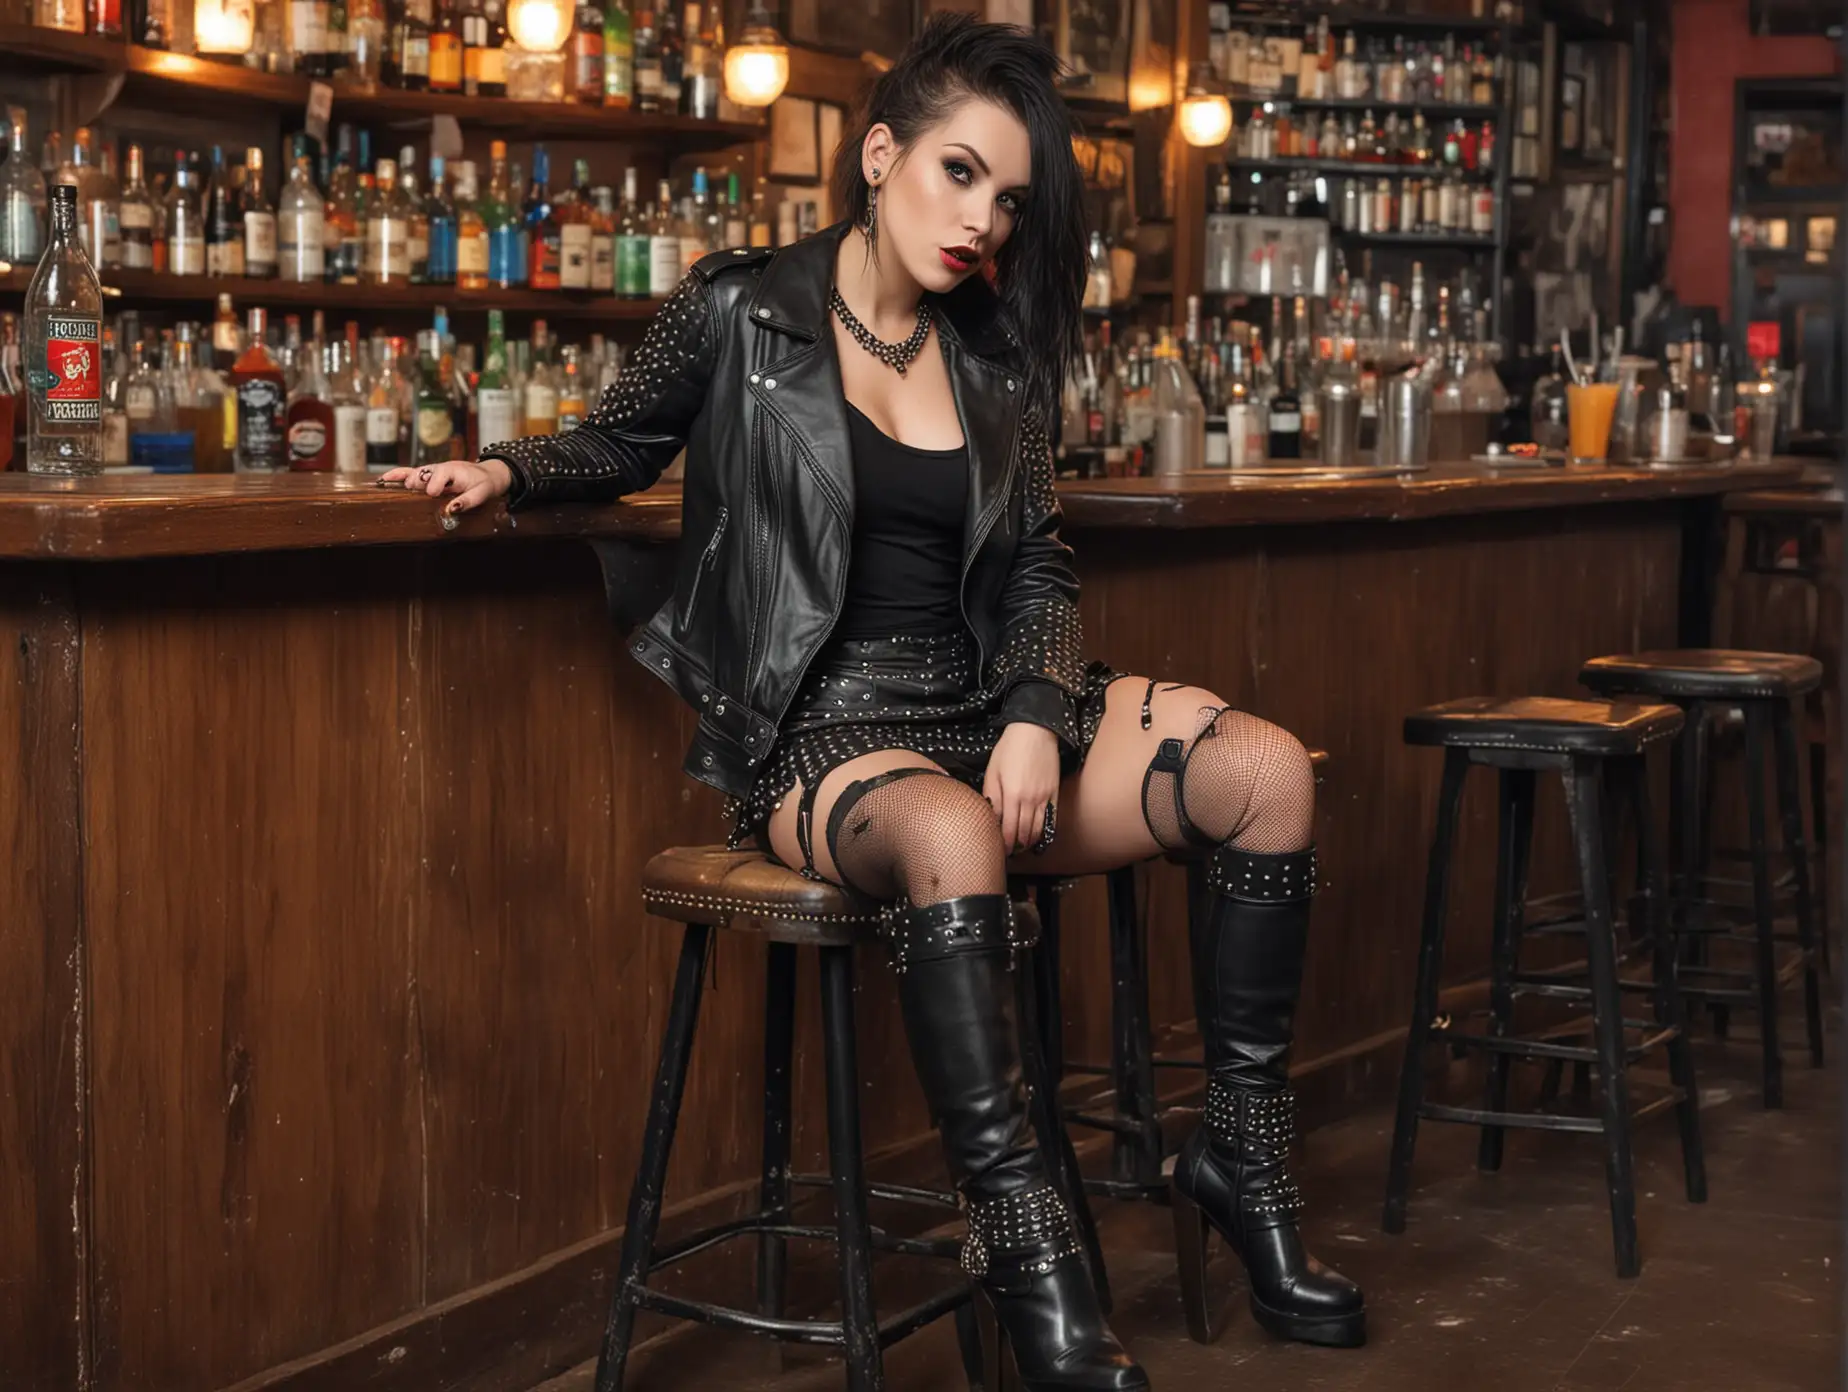 Edgy-Punk-Girl-in-Studded-Leather-Jacket-Skirt-and-Boots-at-Bar